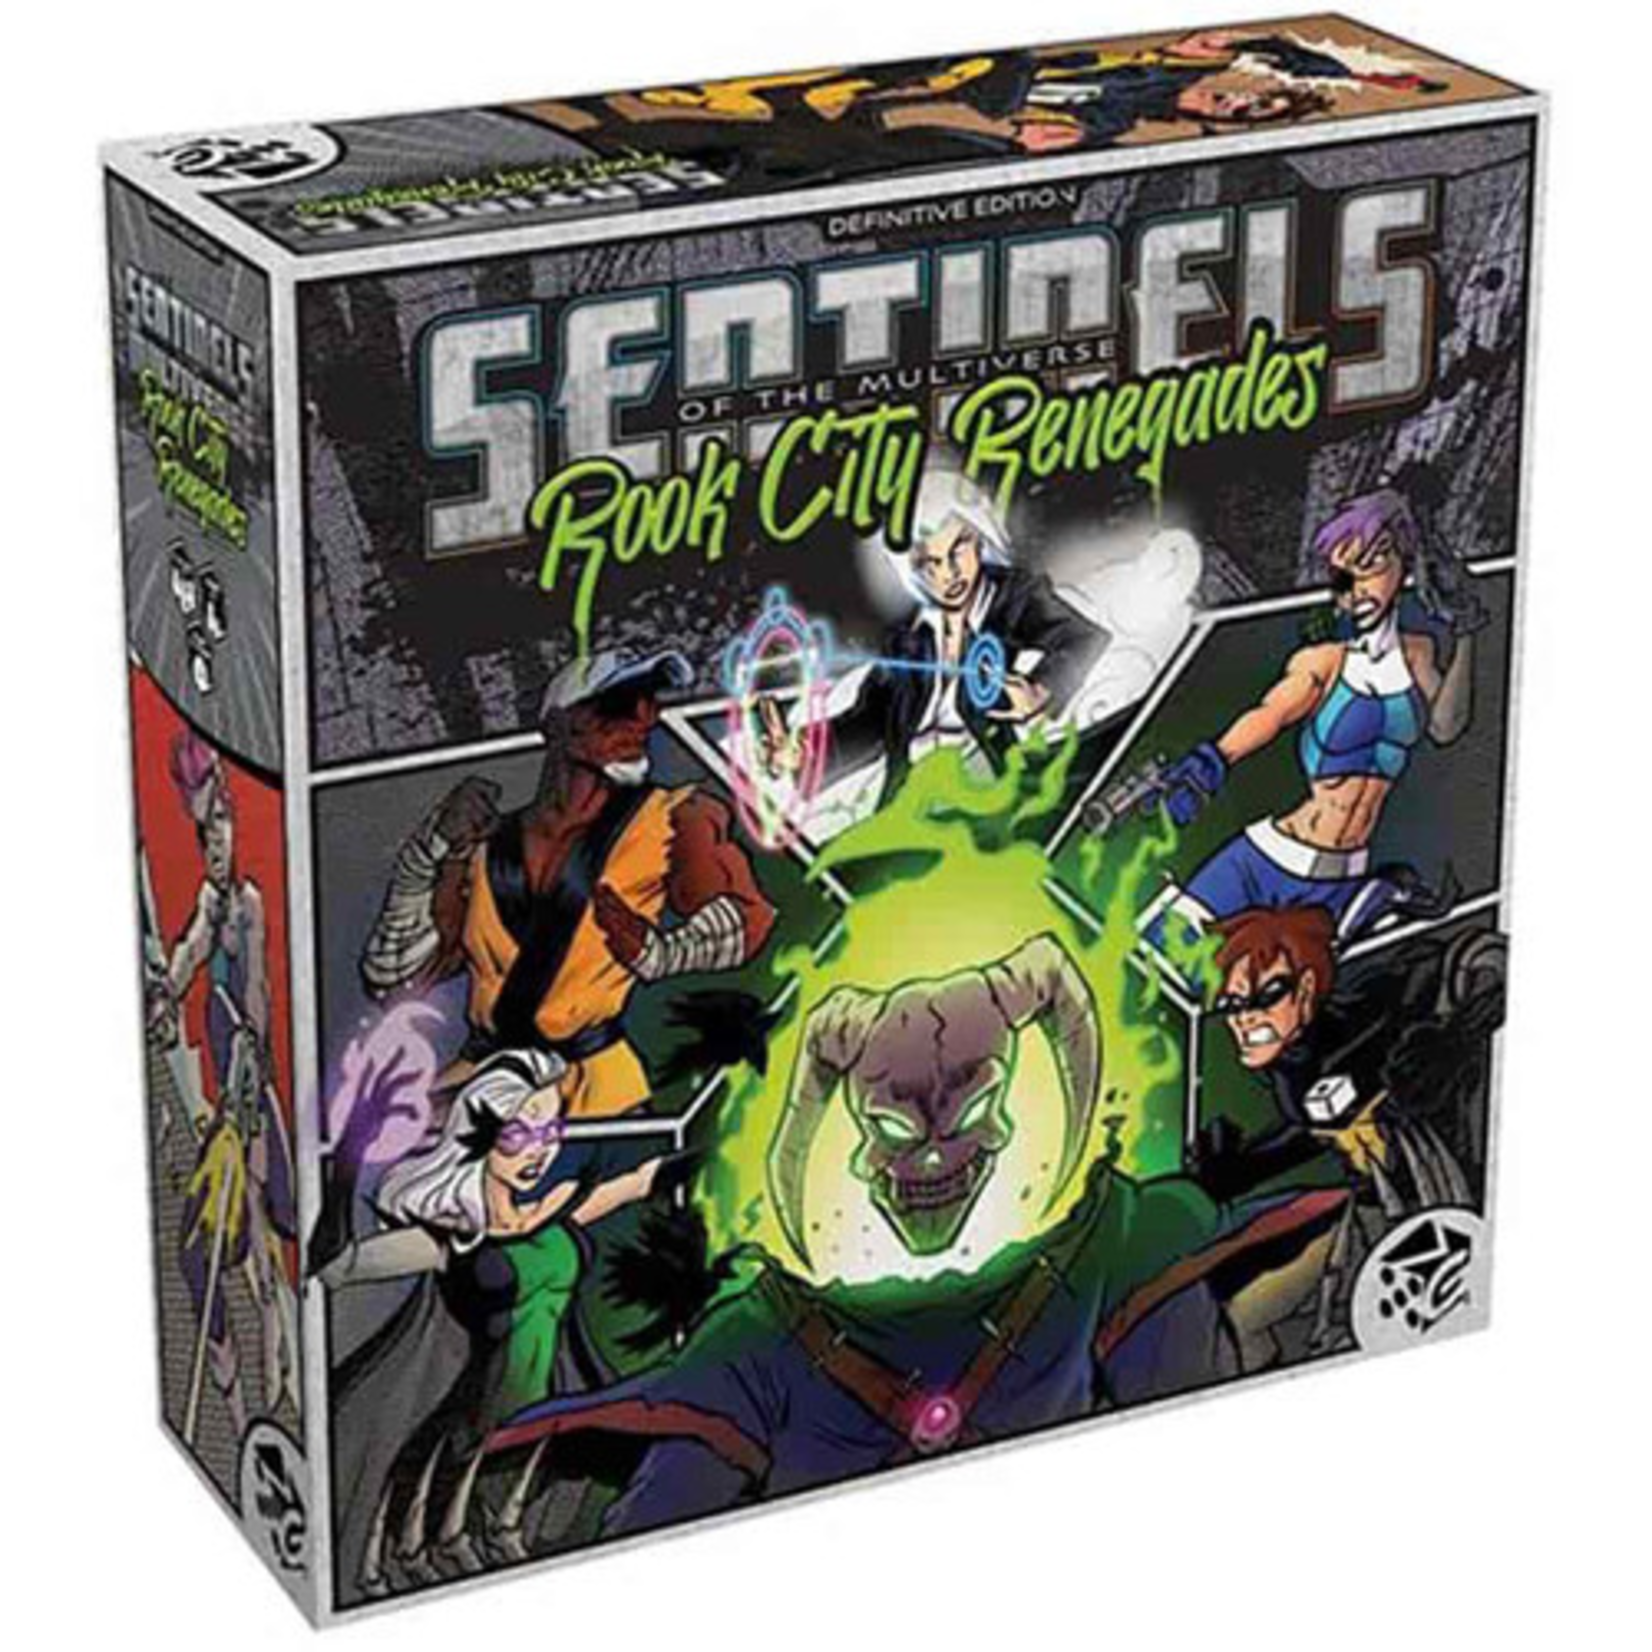 Greater Than Games Sentinels of the Multiverse Definitive Edition Rook City Renegades Expansion